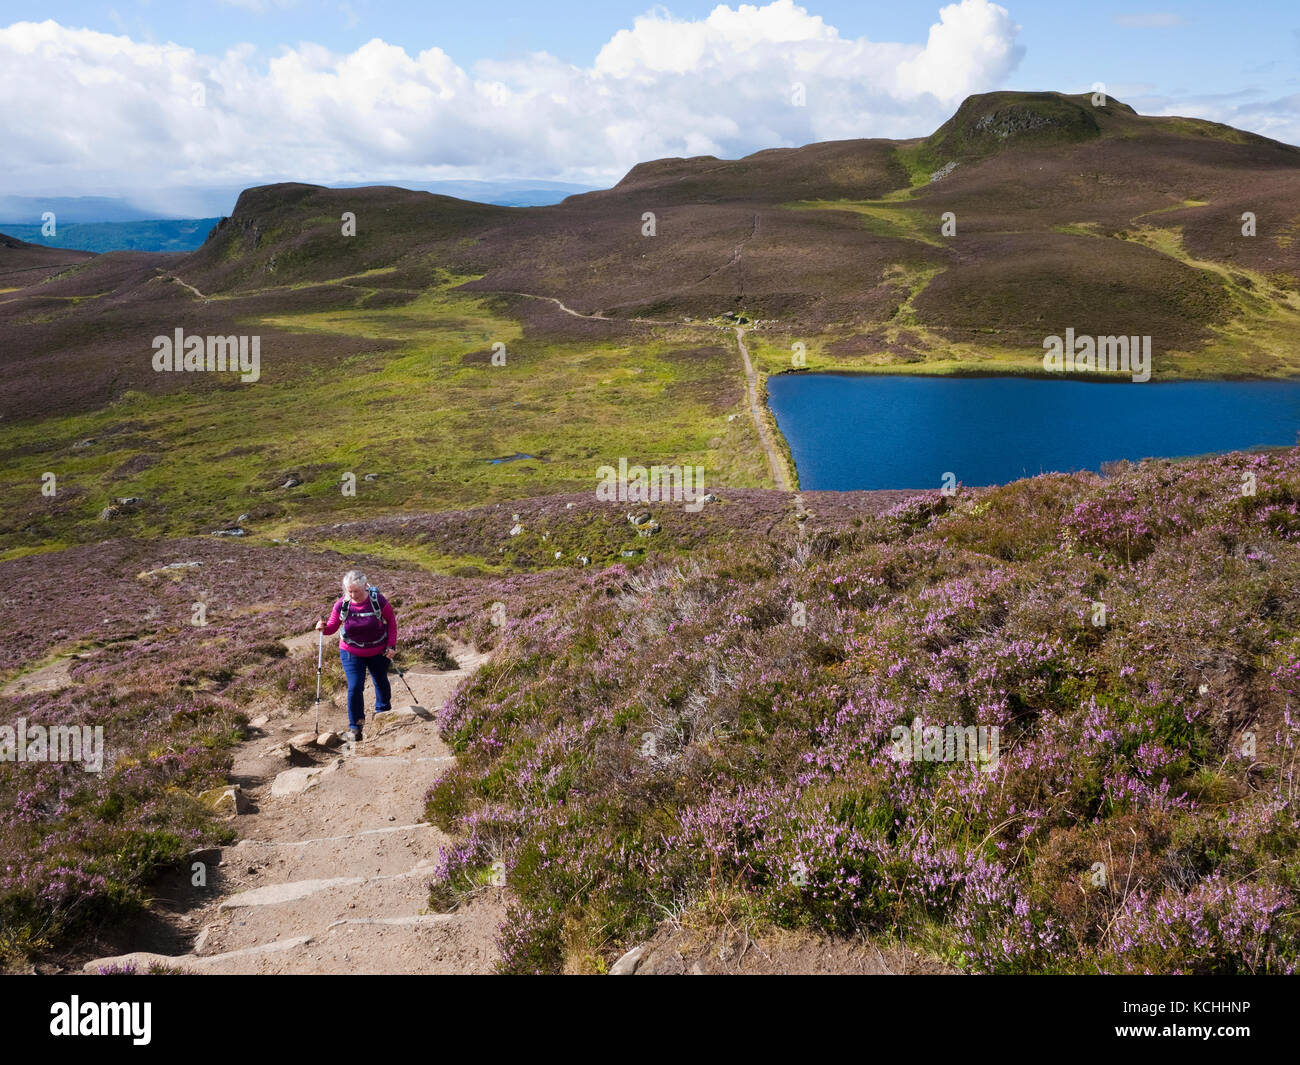 A female walker climbing Ben Vrackie, a hill outside the Perthshire town of Pitlochry. Loch a'Choire can be seen below. Stock Photo